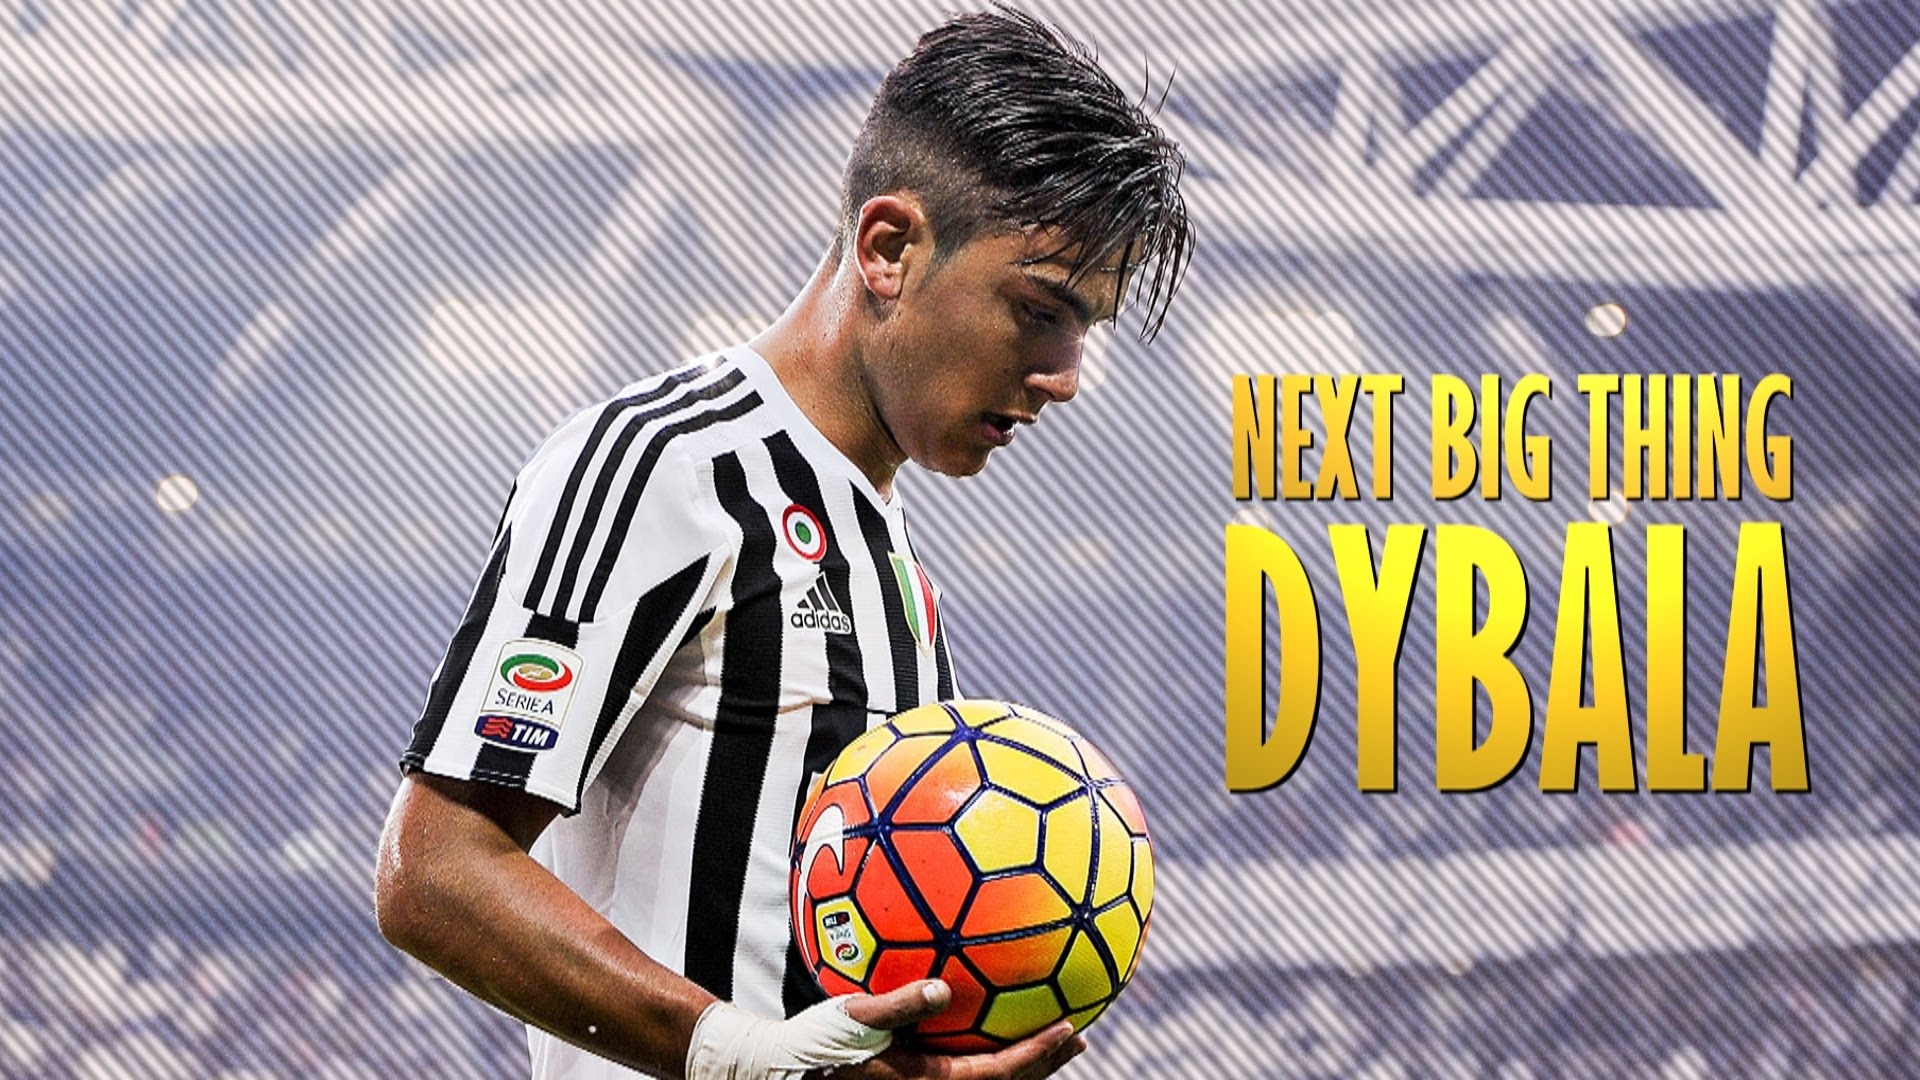 Dybala Wallpaper - P Dybala Wallpaper Hd , HD Wallpaper & Backgrounds